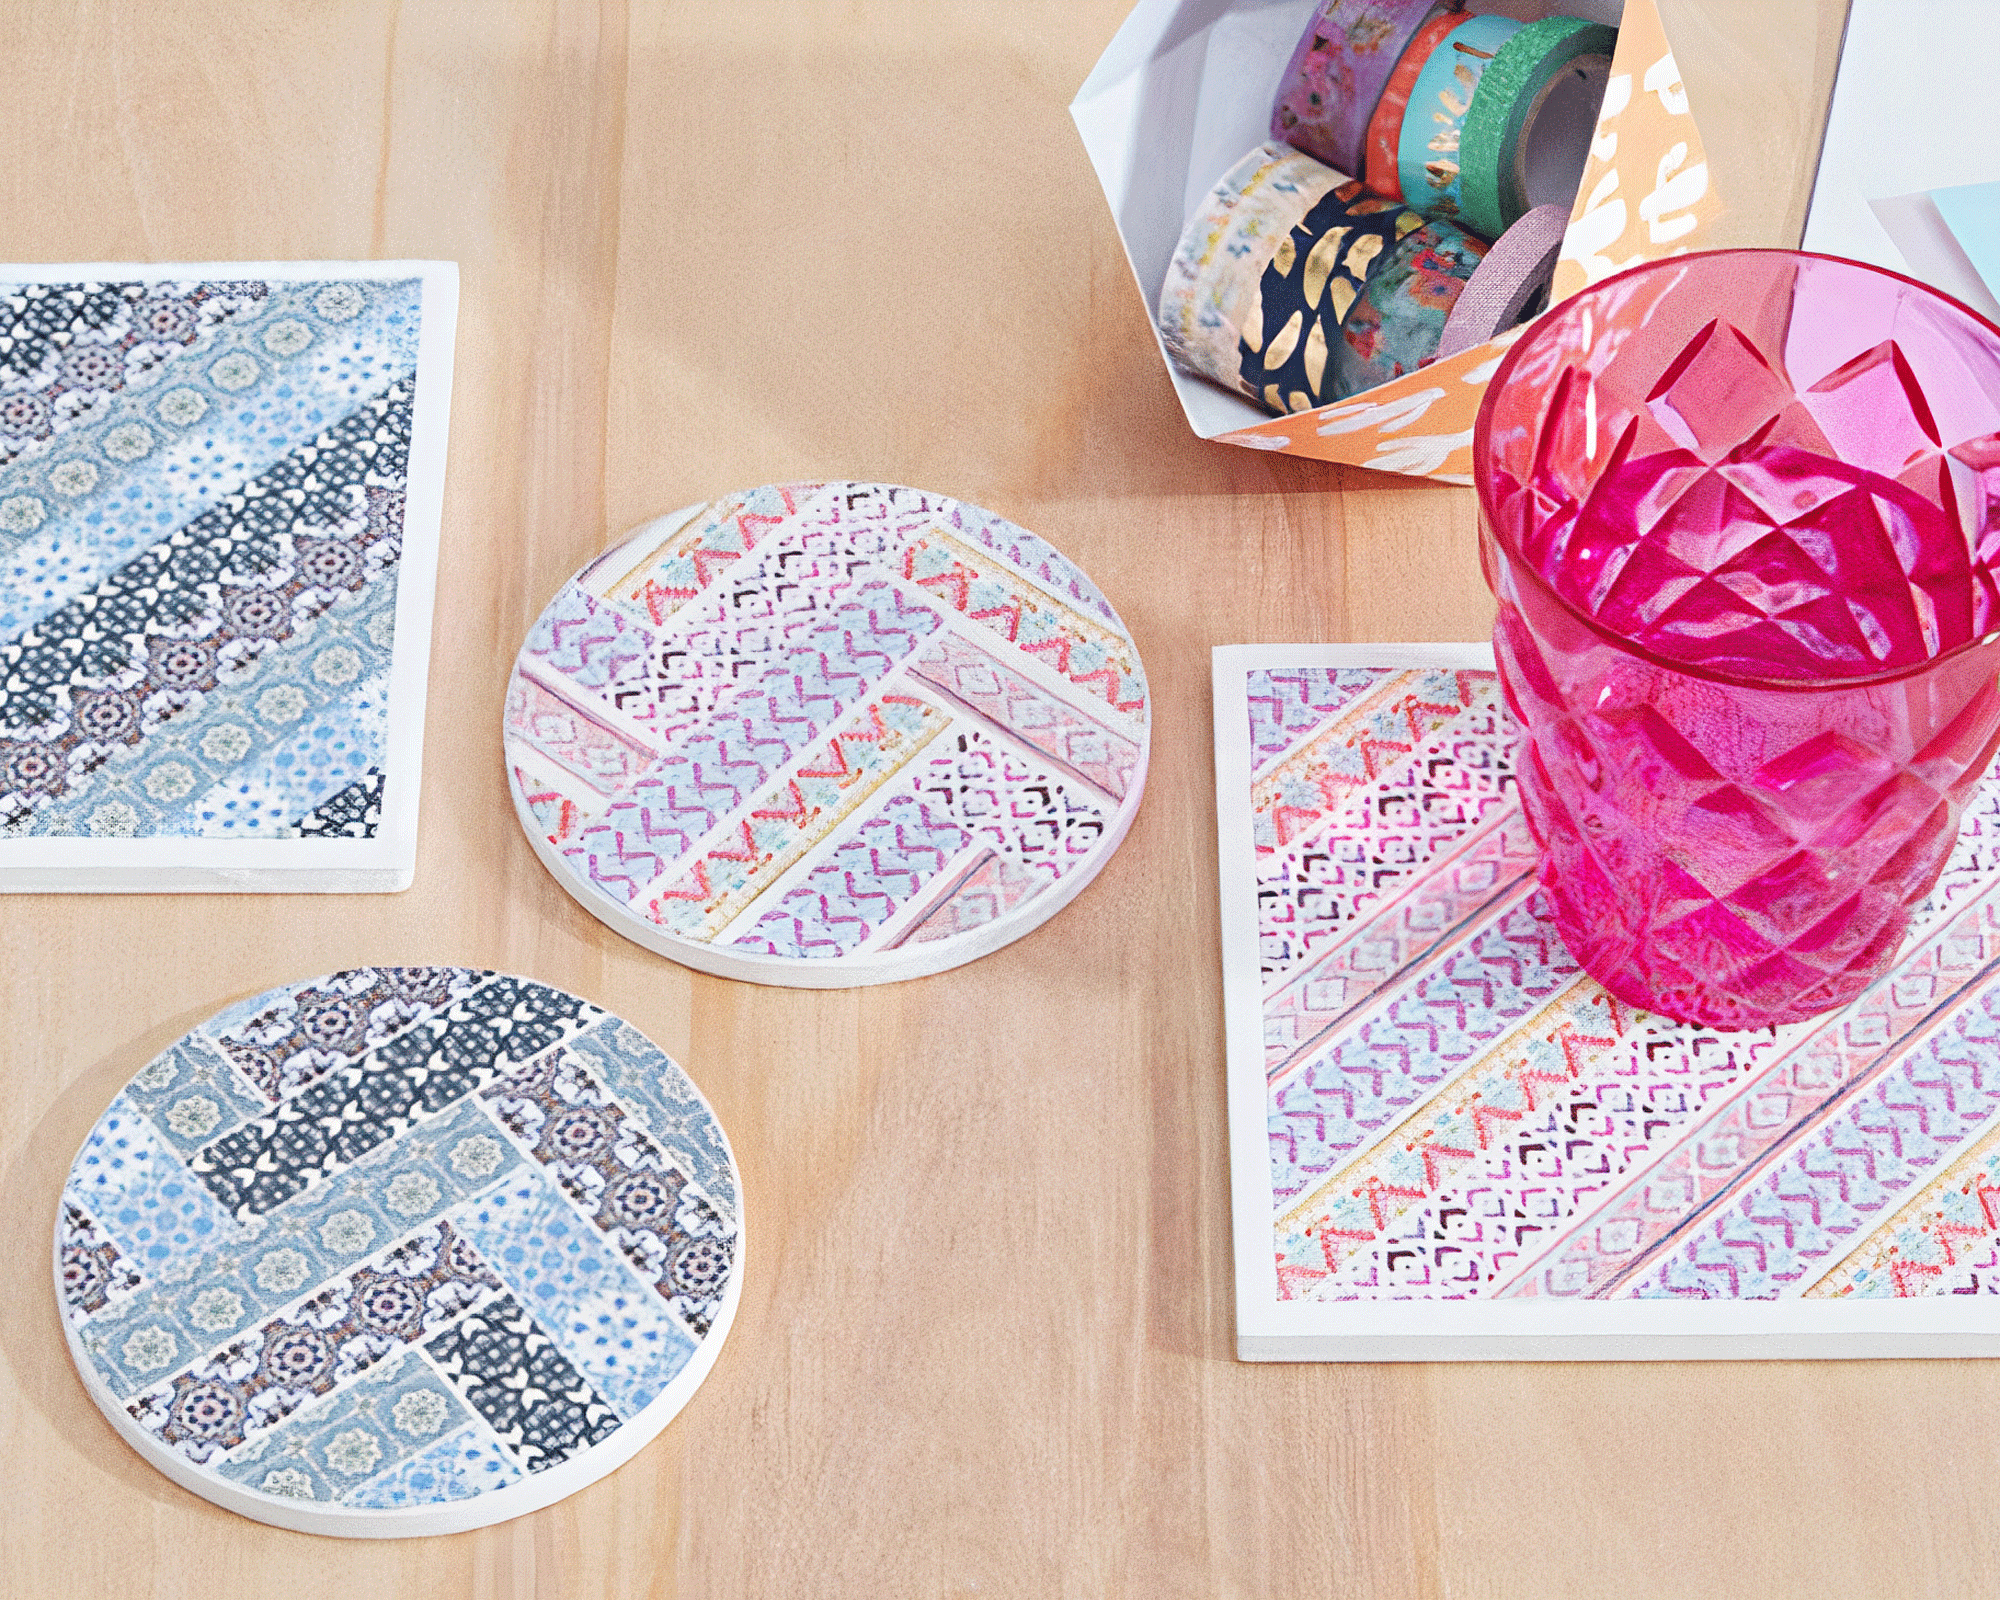 Colorful DIY washi tape coasters with mixed patterns.